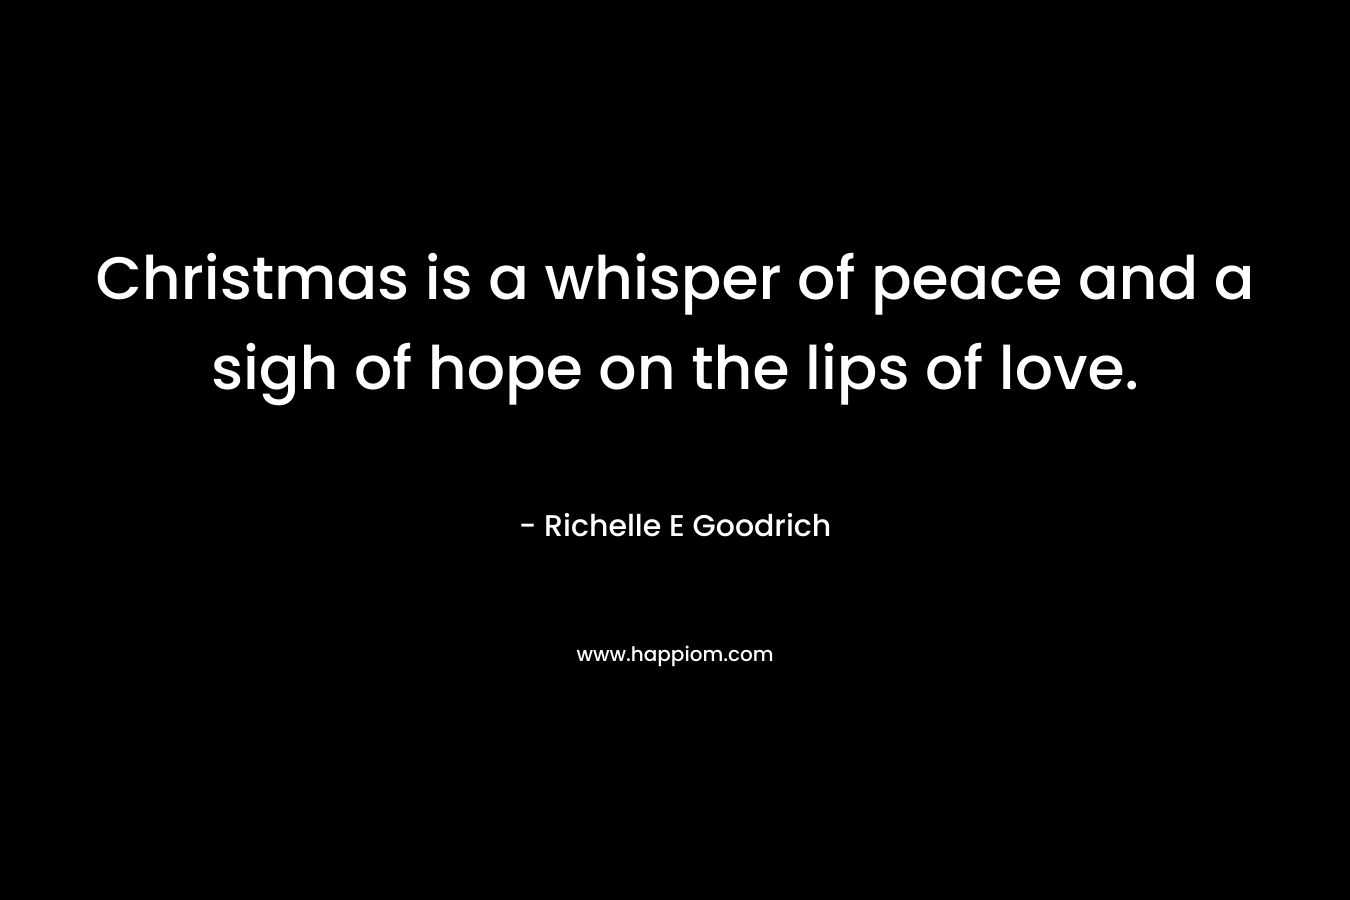 Christmas is a whisper of peace and a sigh of hope on the lips of love. – Richelle E Goodrich